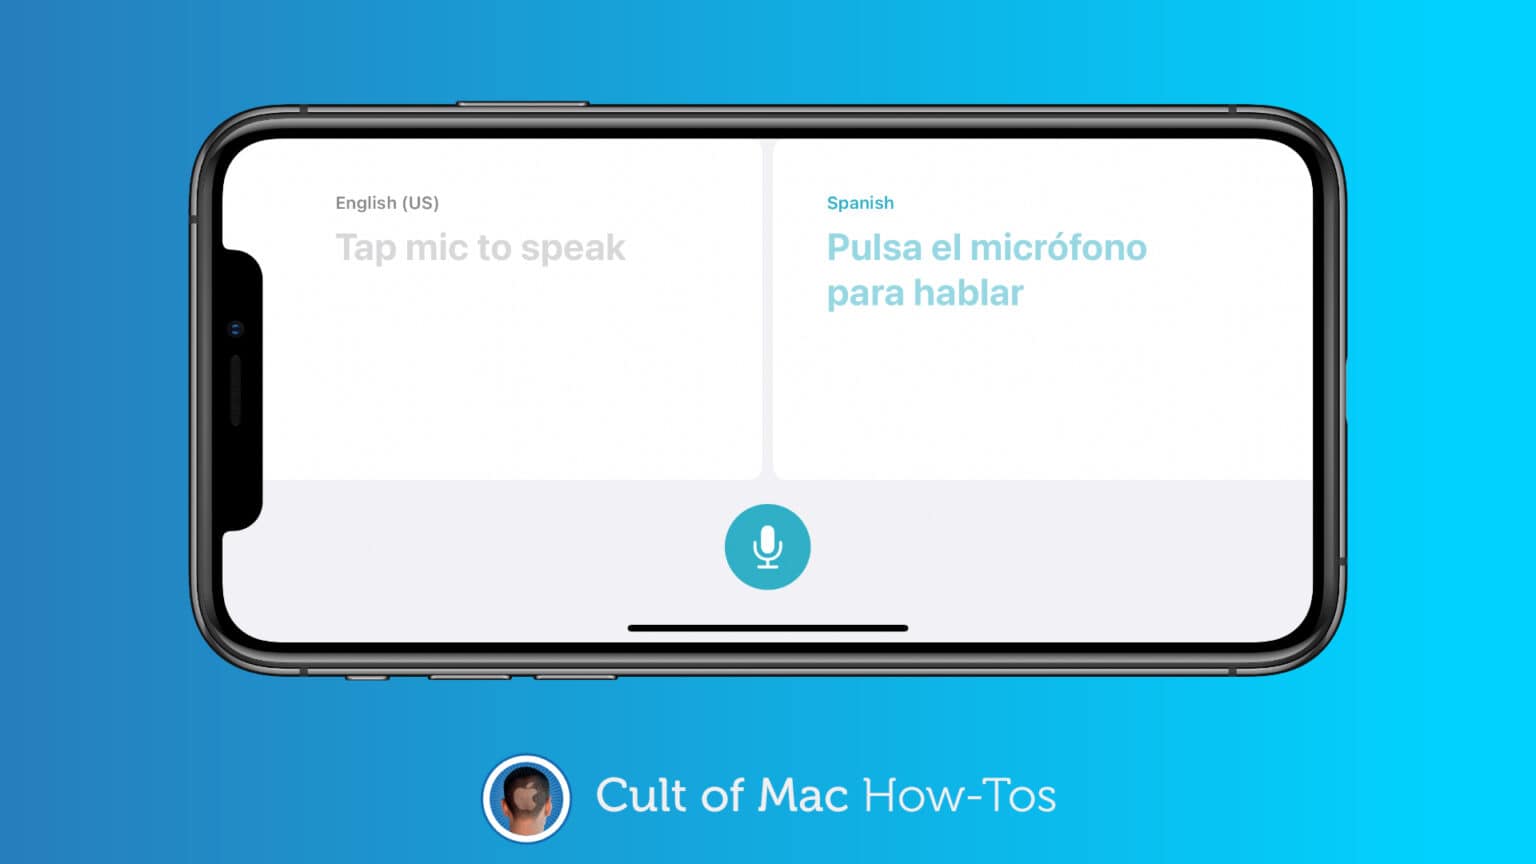 Download languages to use iOS 14's new Translate app offline